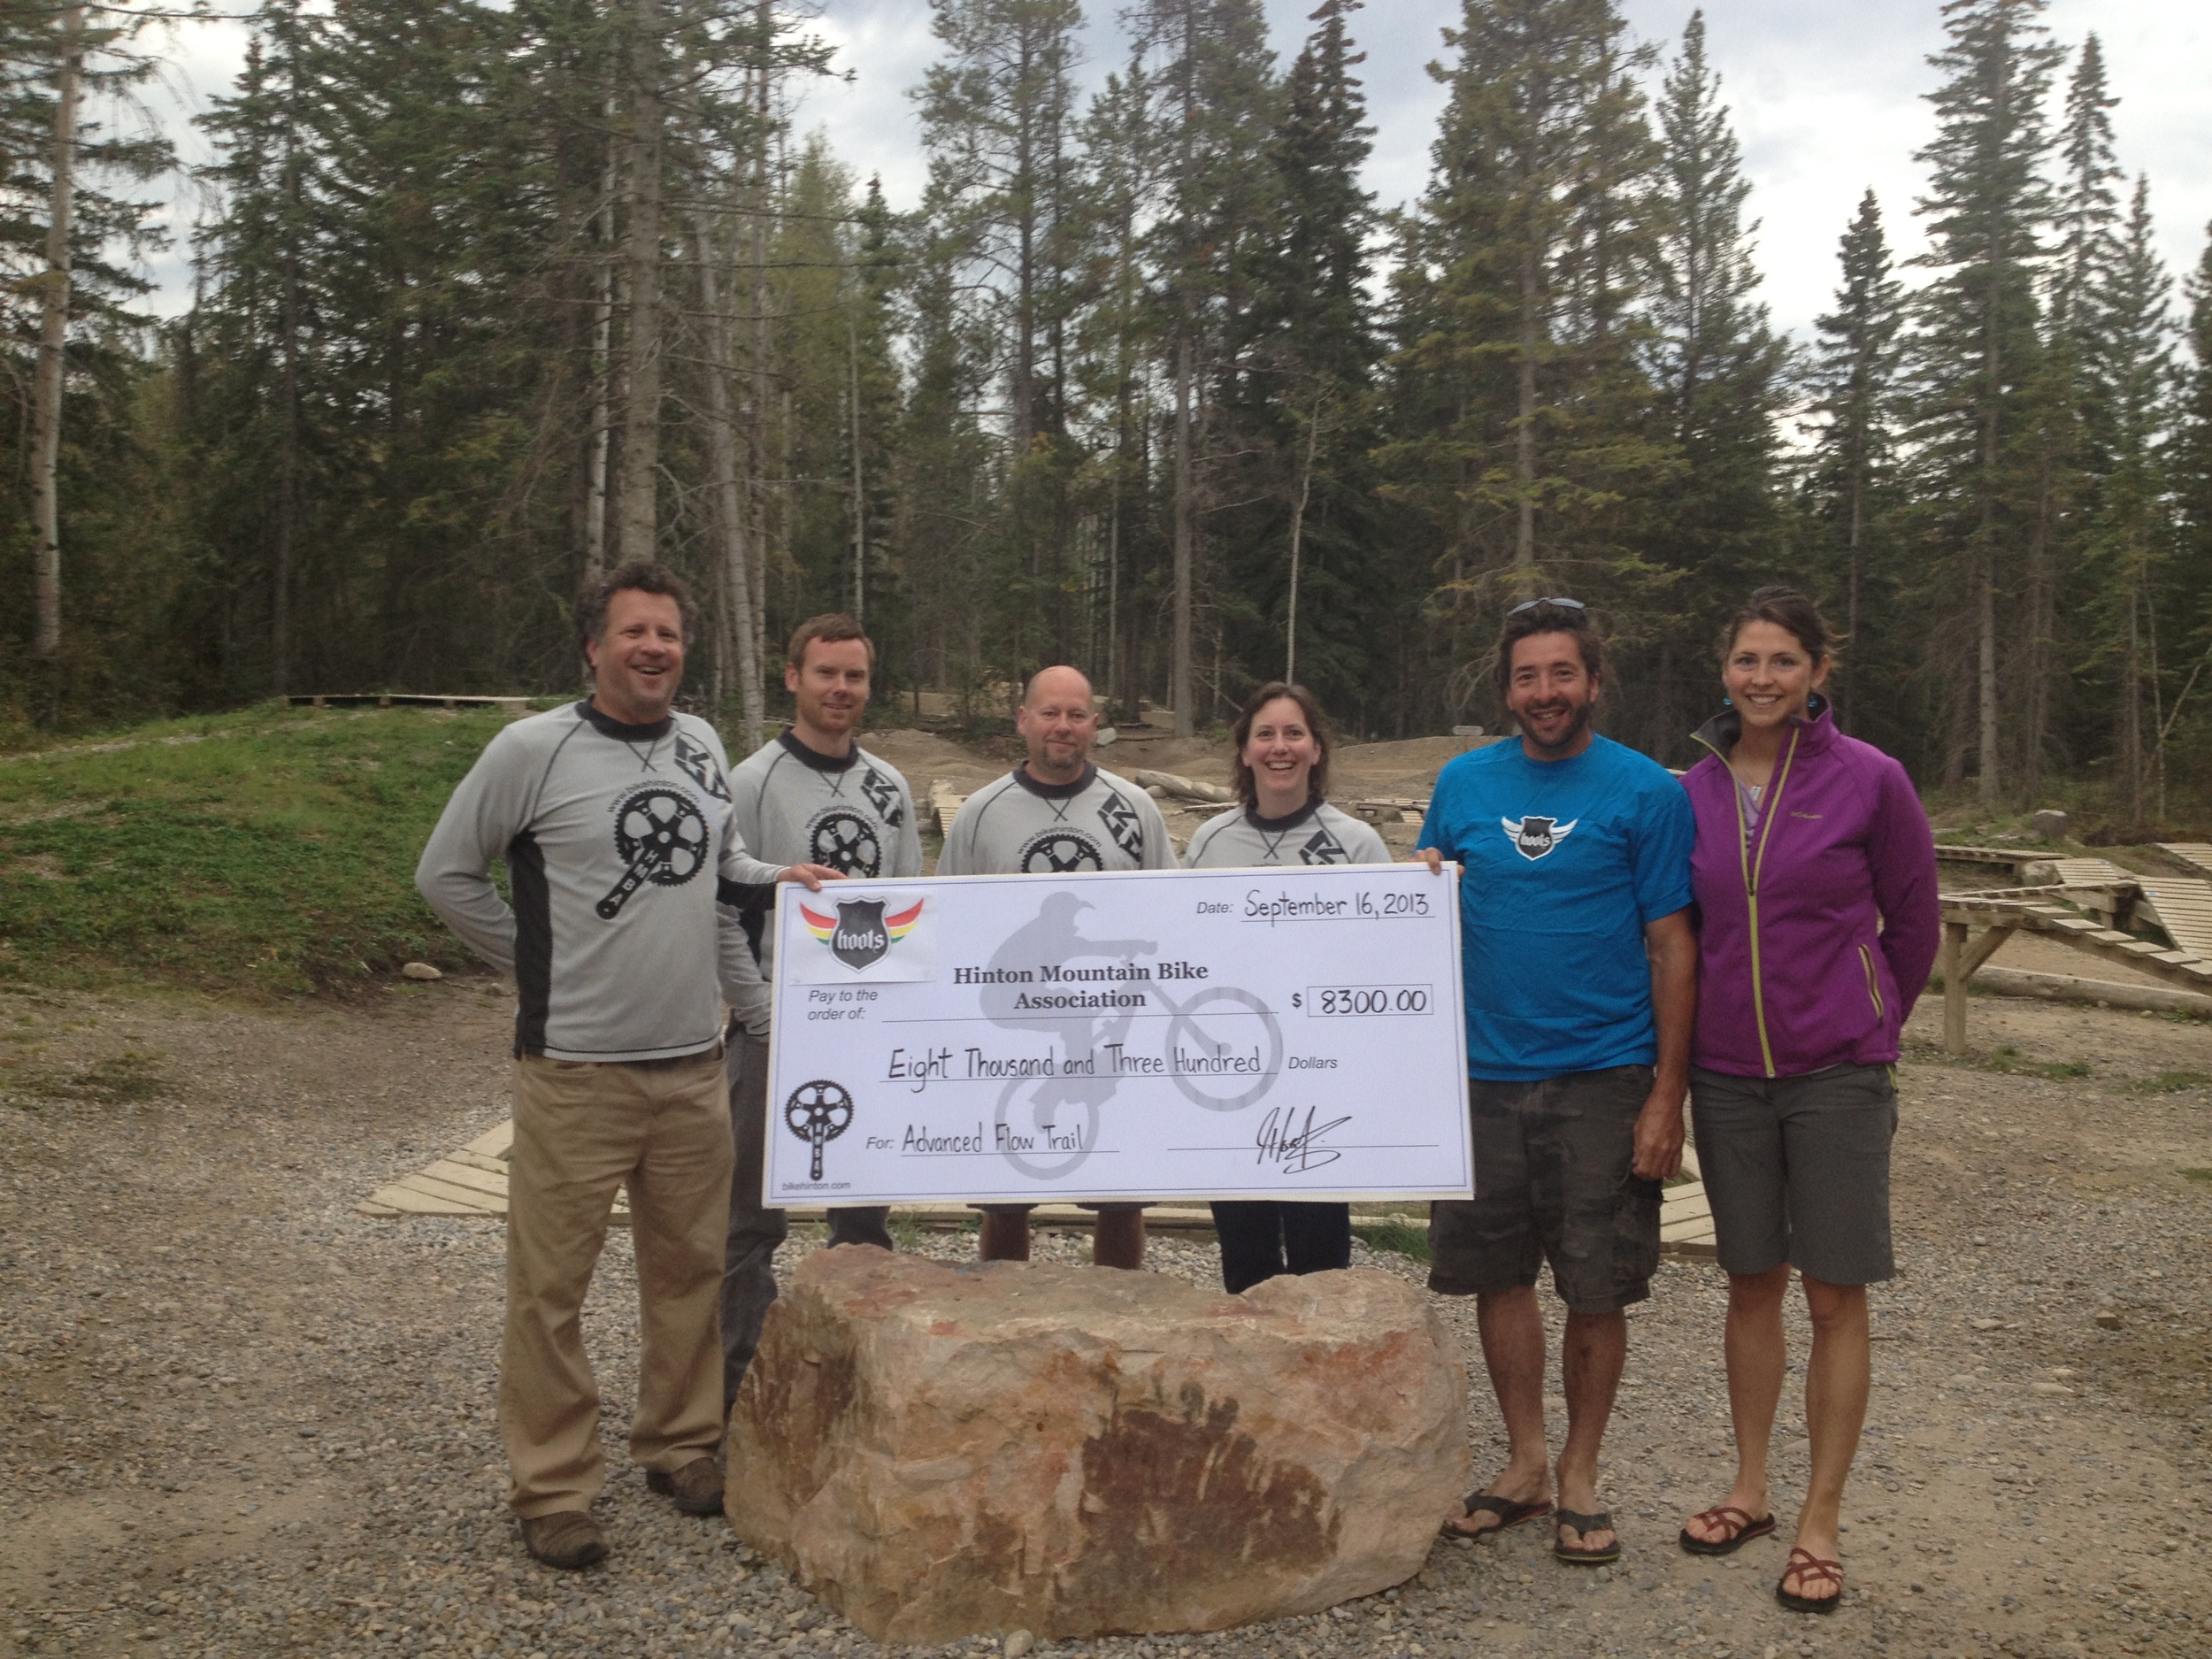 HMBA Receives Advanced Flow Trail Donation from Hoots Inc.